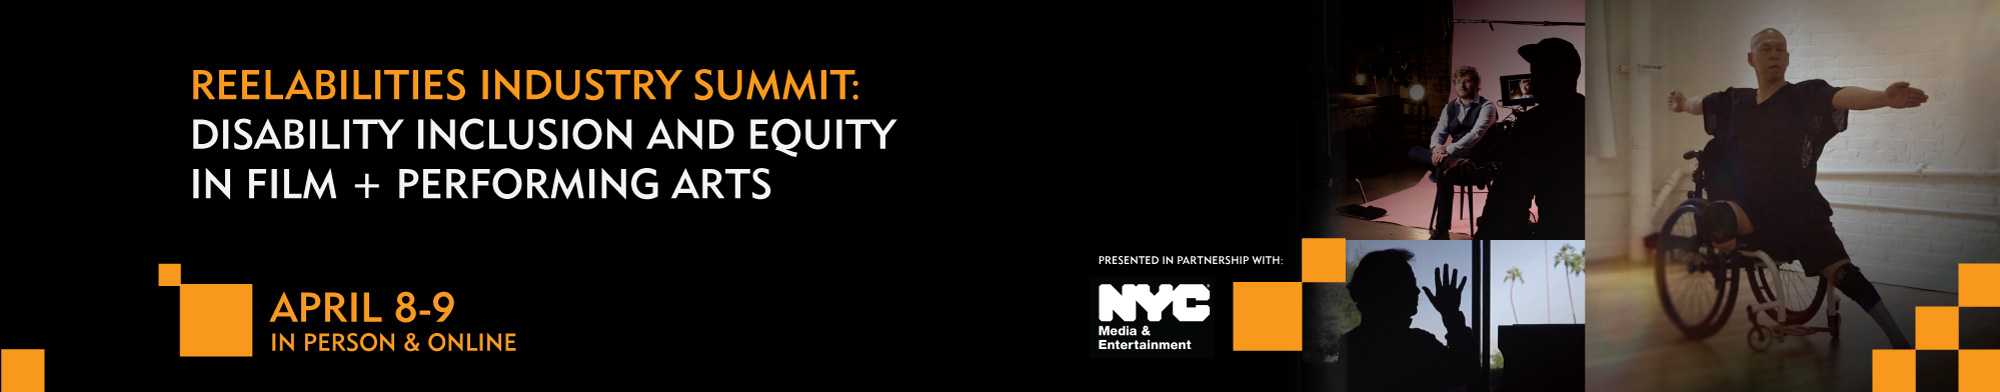 ReelAbilities Industry Summit: Disability Inclusion and Equity in Film + Performing Arts April 8-9, 2024 -  In-person and online. Presented in partnership with NYC Media and Entertainment